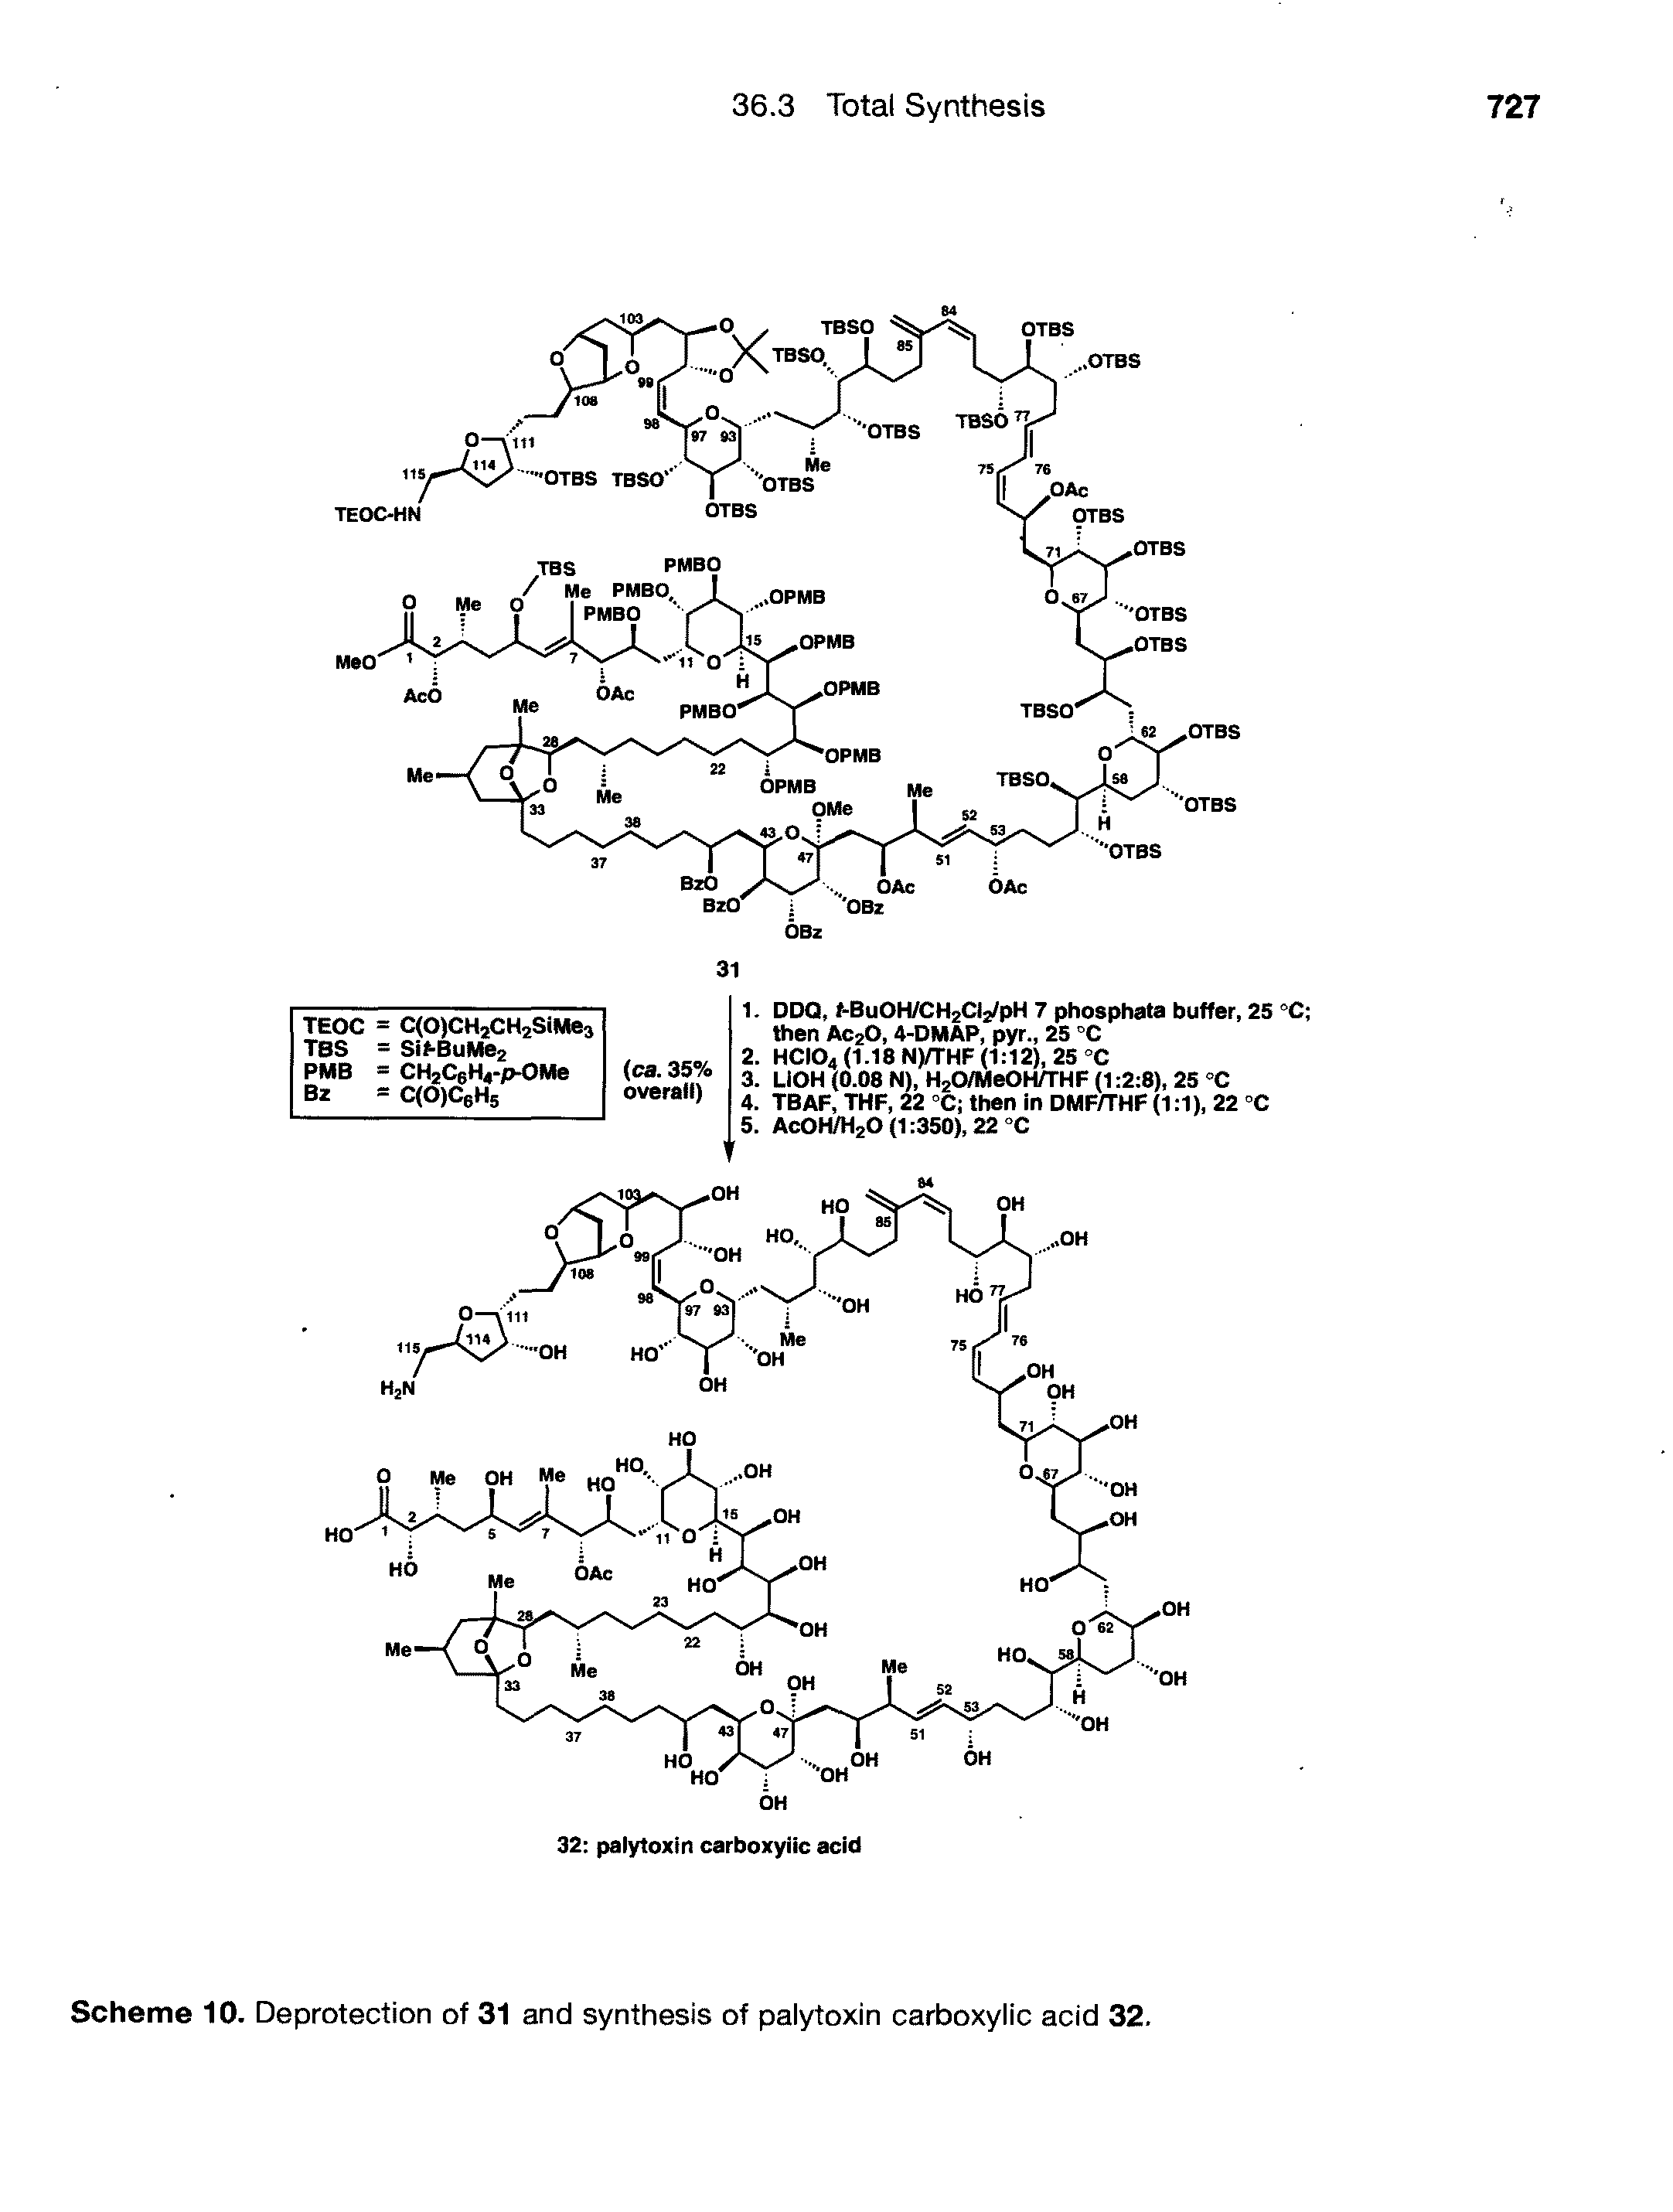 Scheme 10. Deprotection of 31 and synthesis of palytoxin carboxylic acid 32.